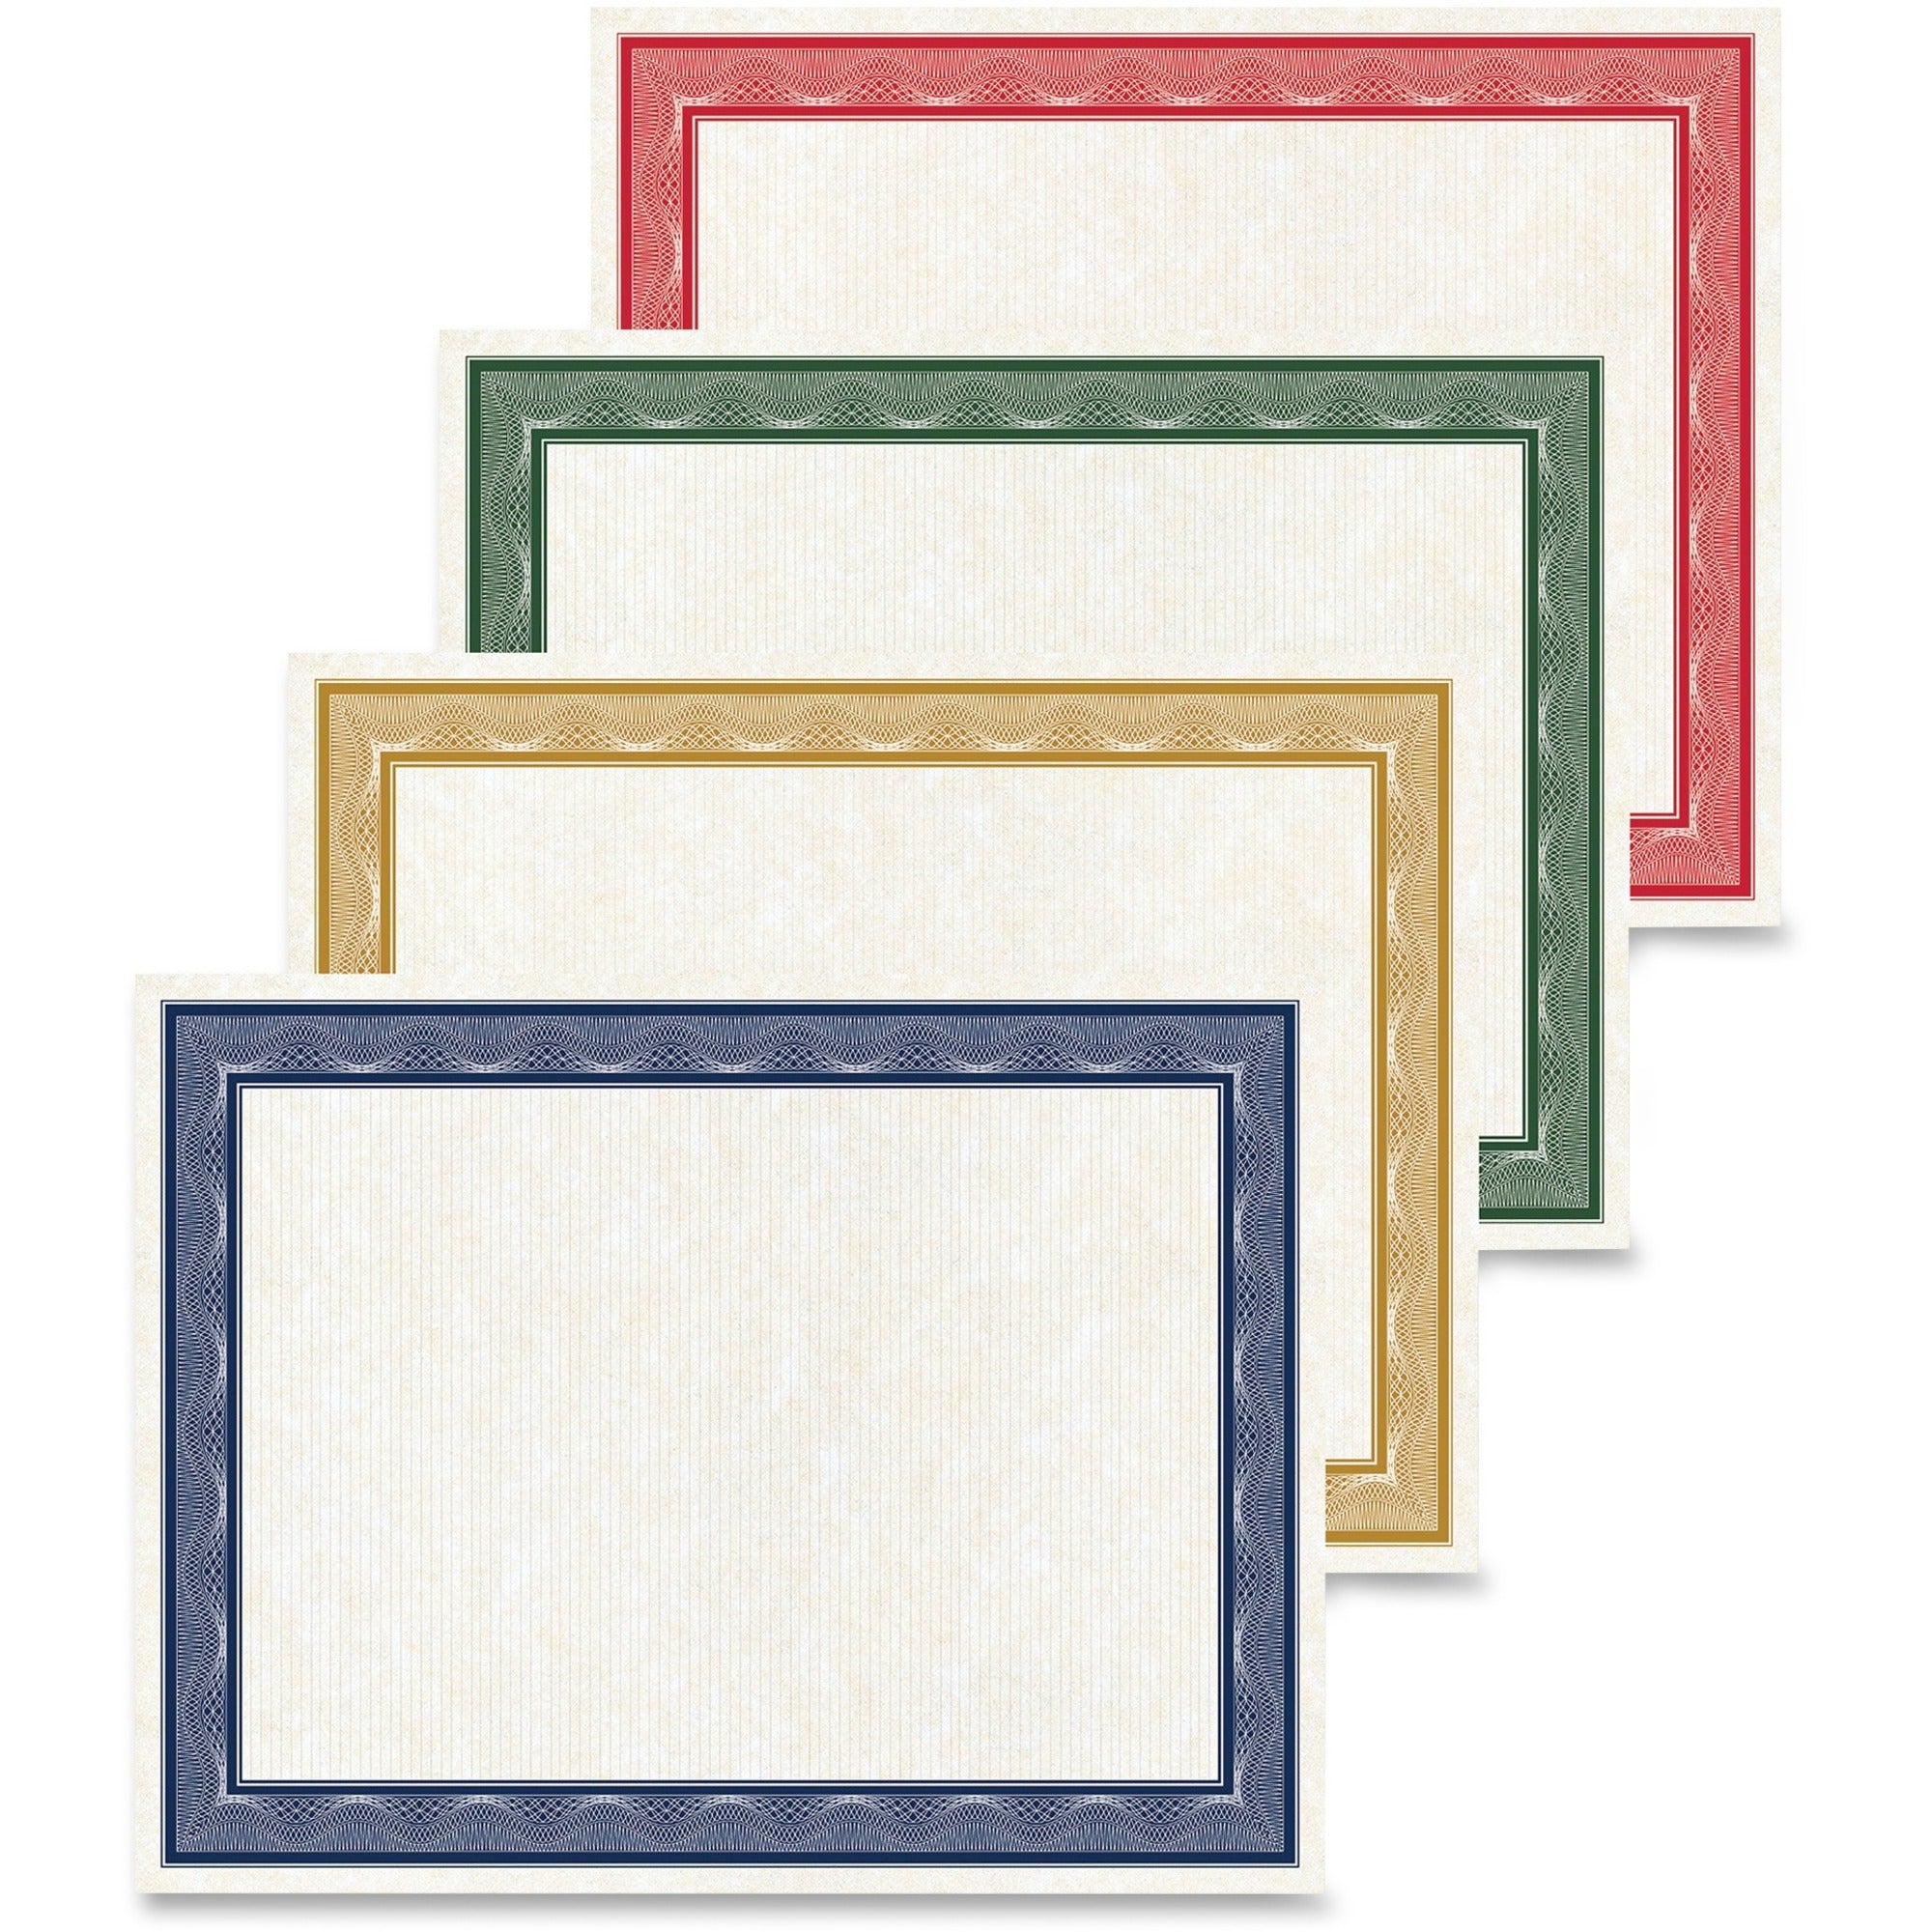 Geographics Traditional Awards Certificates - 60 lb Basis Weight - 8.5" x 11" - Inkjet Compatible - White with Multicolor Border - Card Stock - 40 / Pack - 